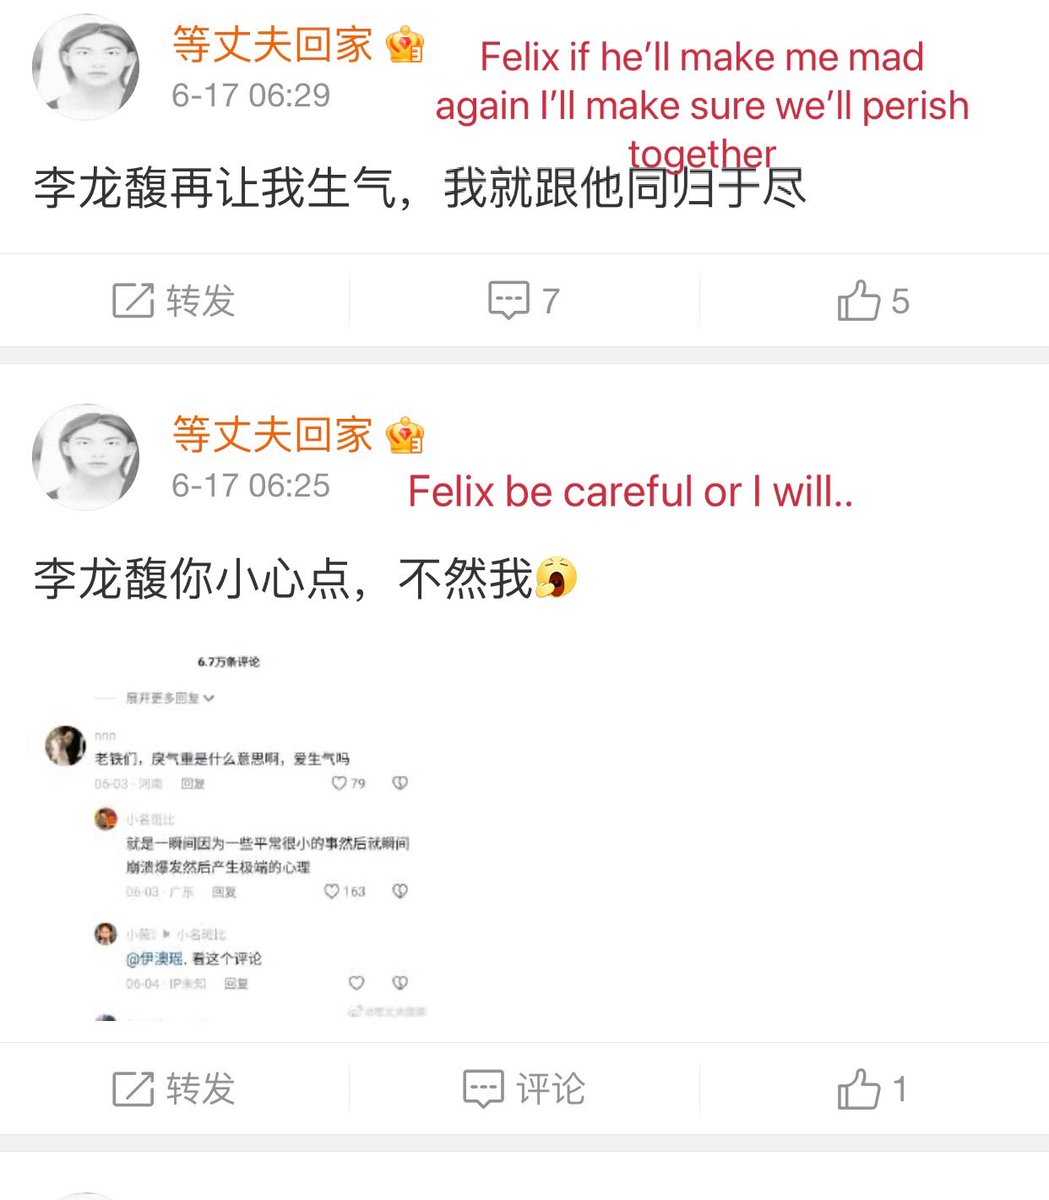 📢 Derαnged akgæs are planning to seriously harm Felix & SKZ members during the upcoming fan sign event in China. WE DEMAND THAT YOU TAKE ACTION IMMEDIATELY TO PROTECT YOUR ARTISTS @jypnation @stay_support JYPE PROTECT YOUR ARTISTS #ProtectFelix #JYPEDoYourJob